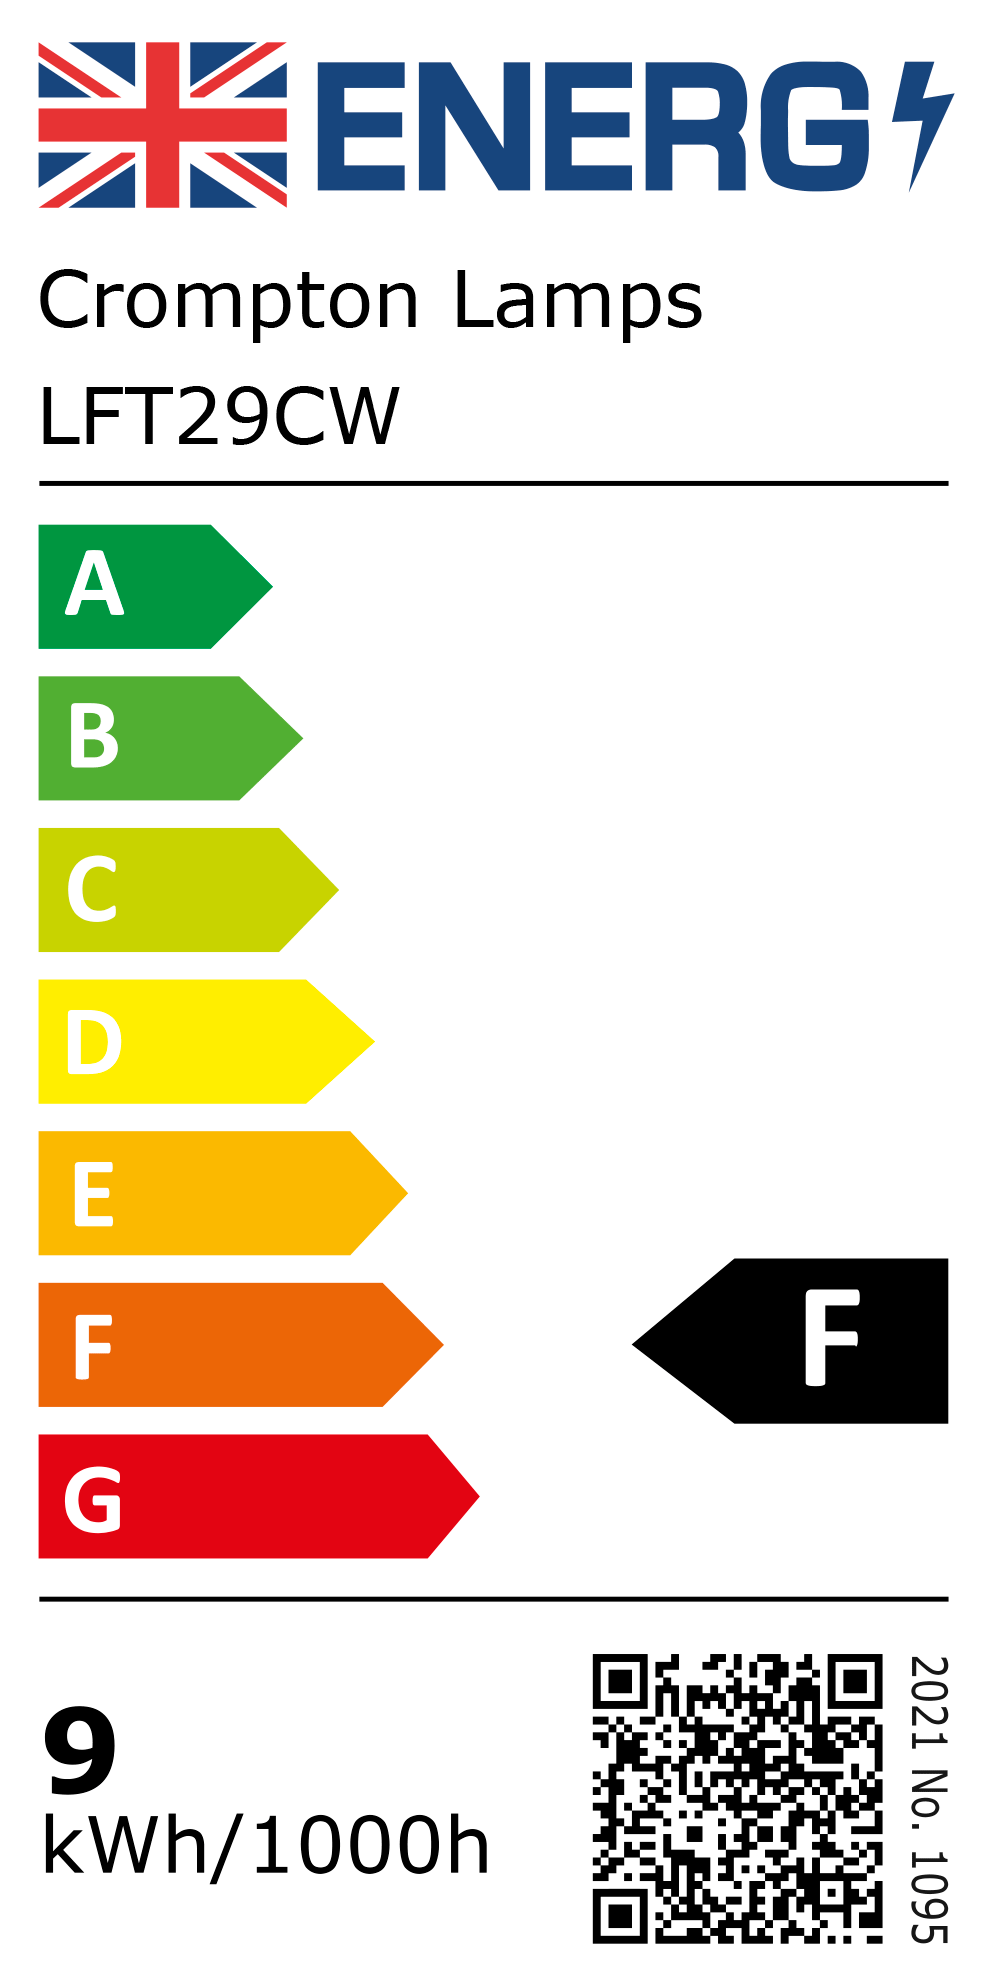 New 2021 Energy Rating Label: Stock Code LFT29CW